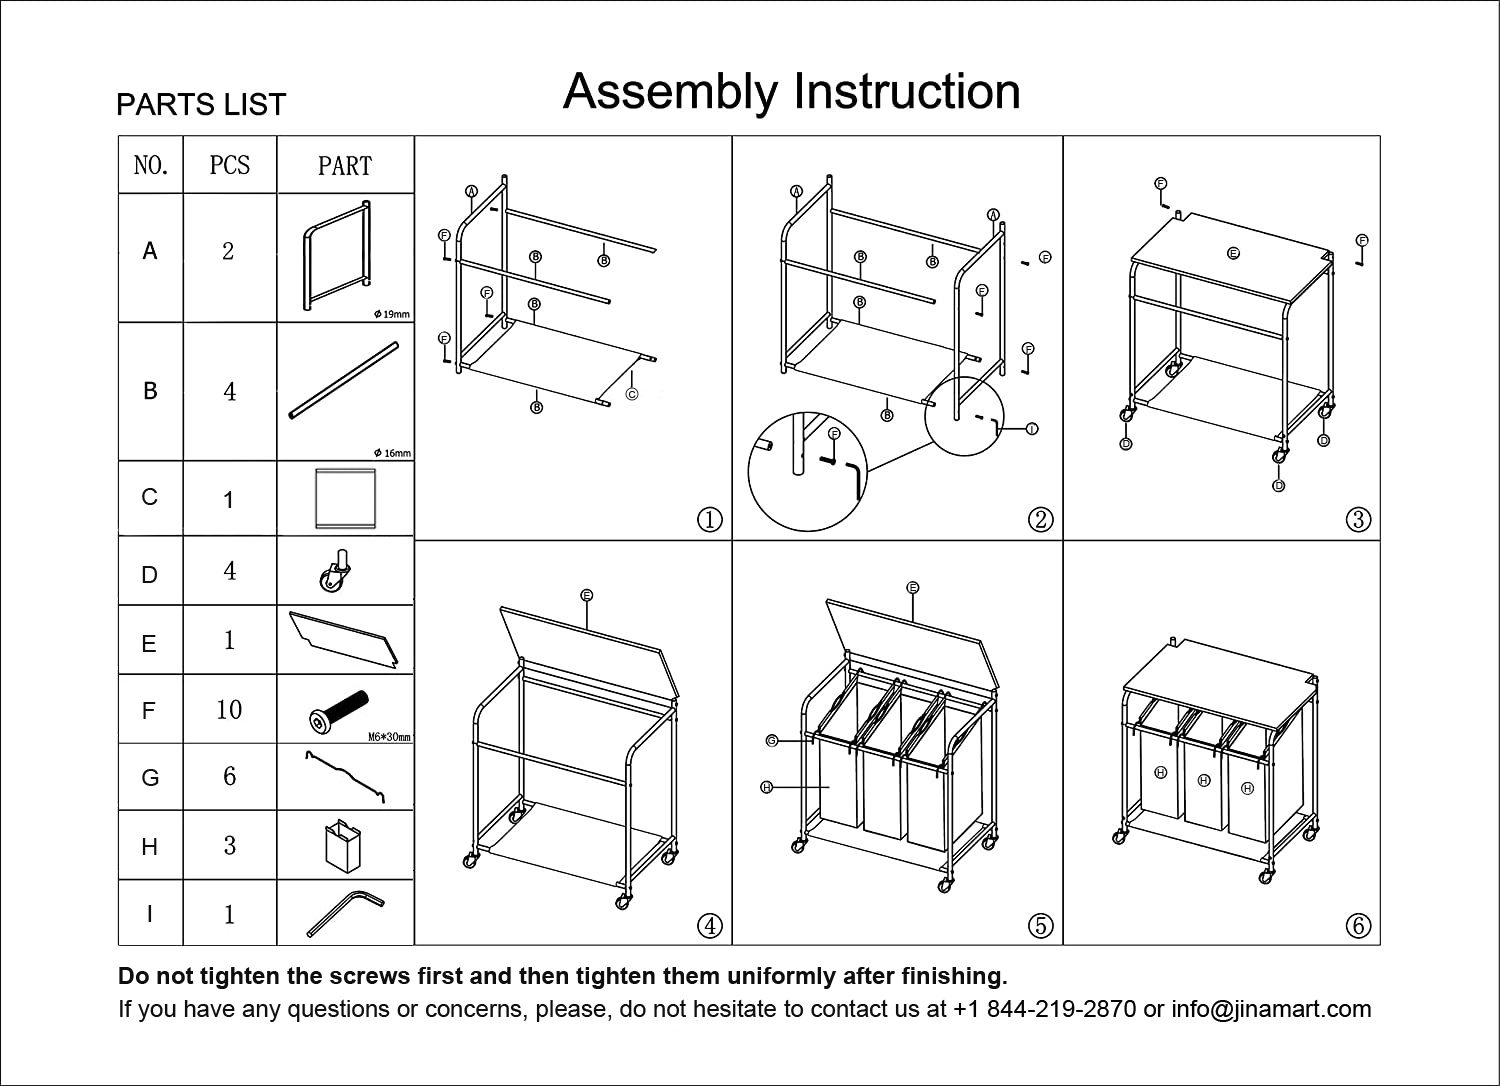 Assembling Instructions for JINAMART Rolling Laundry Hamper with Iron board